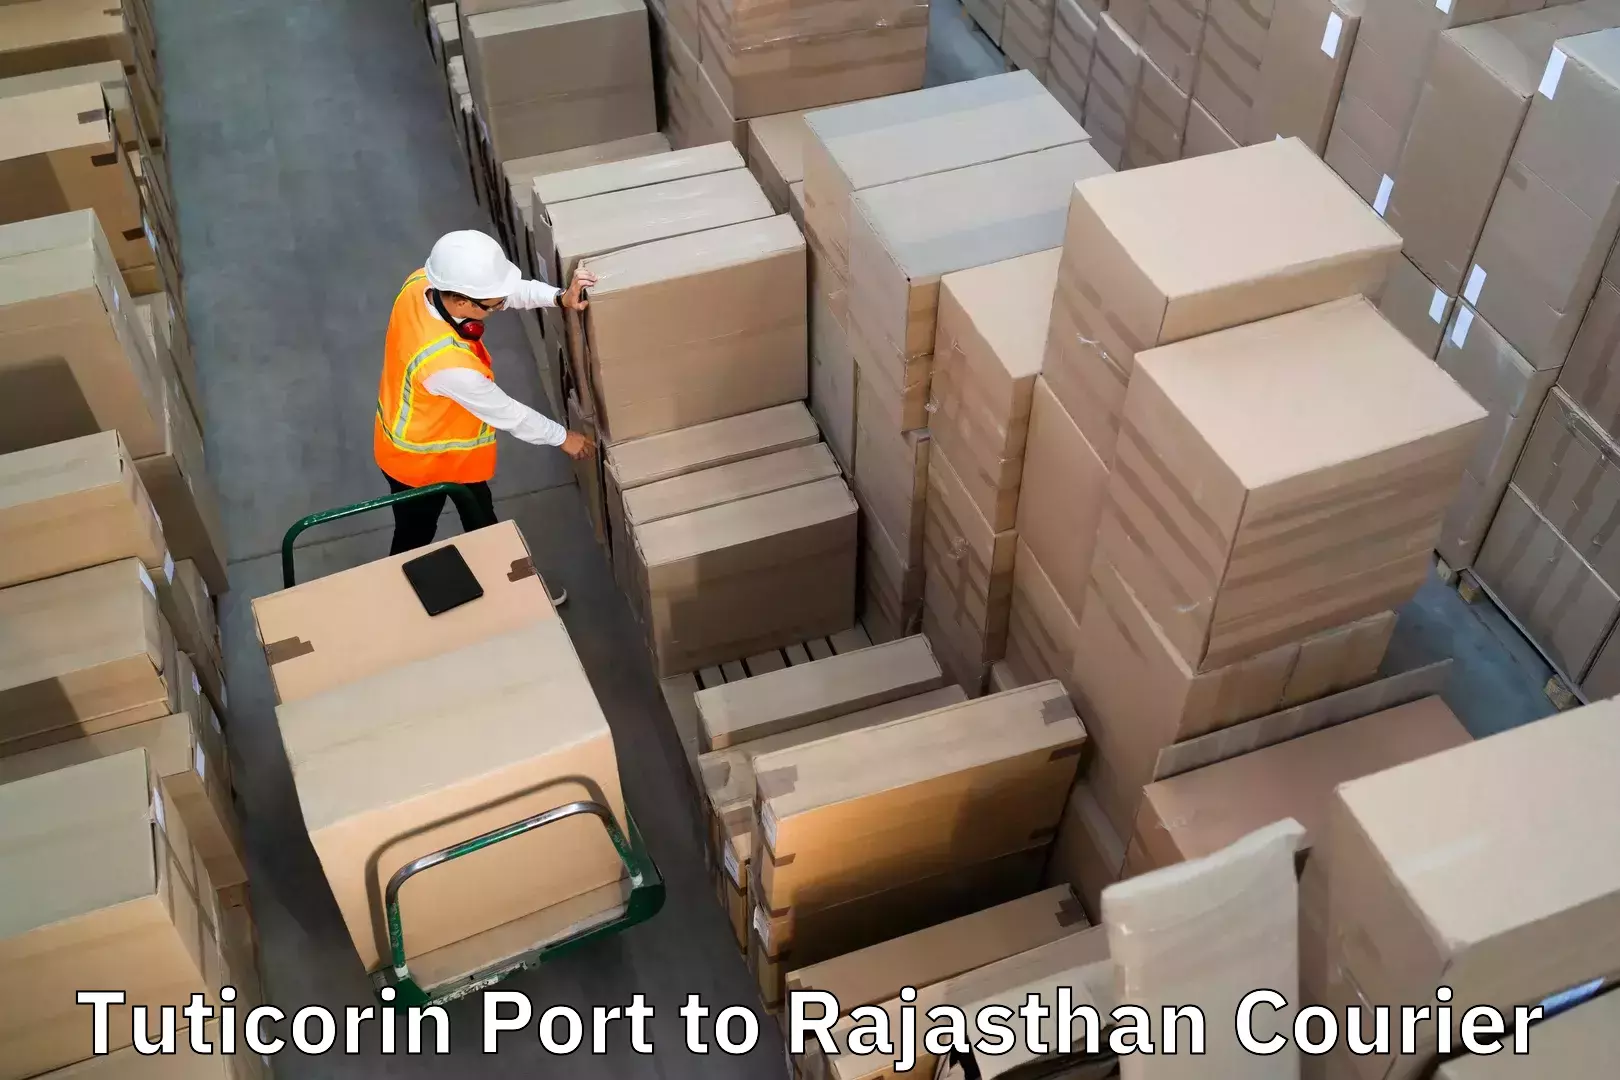 Luggage delivery providers Tuticorin Port to Khairthal